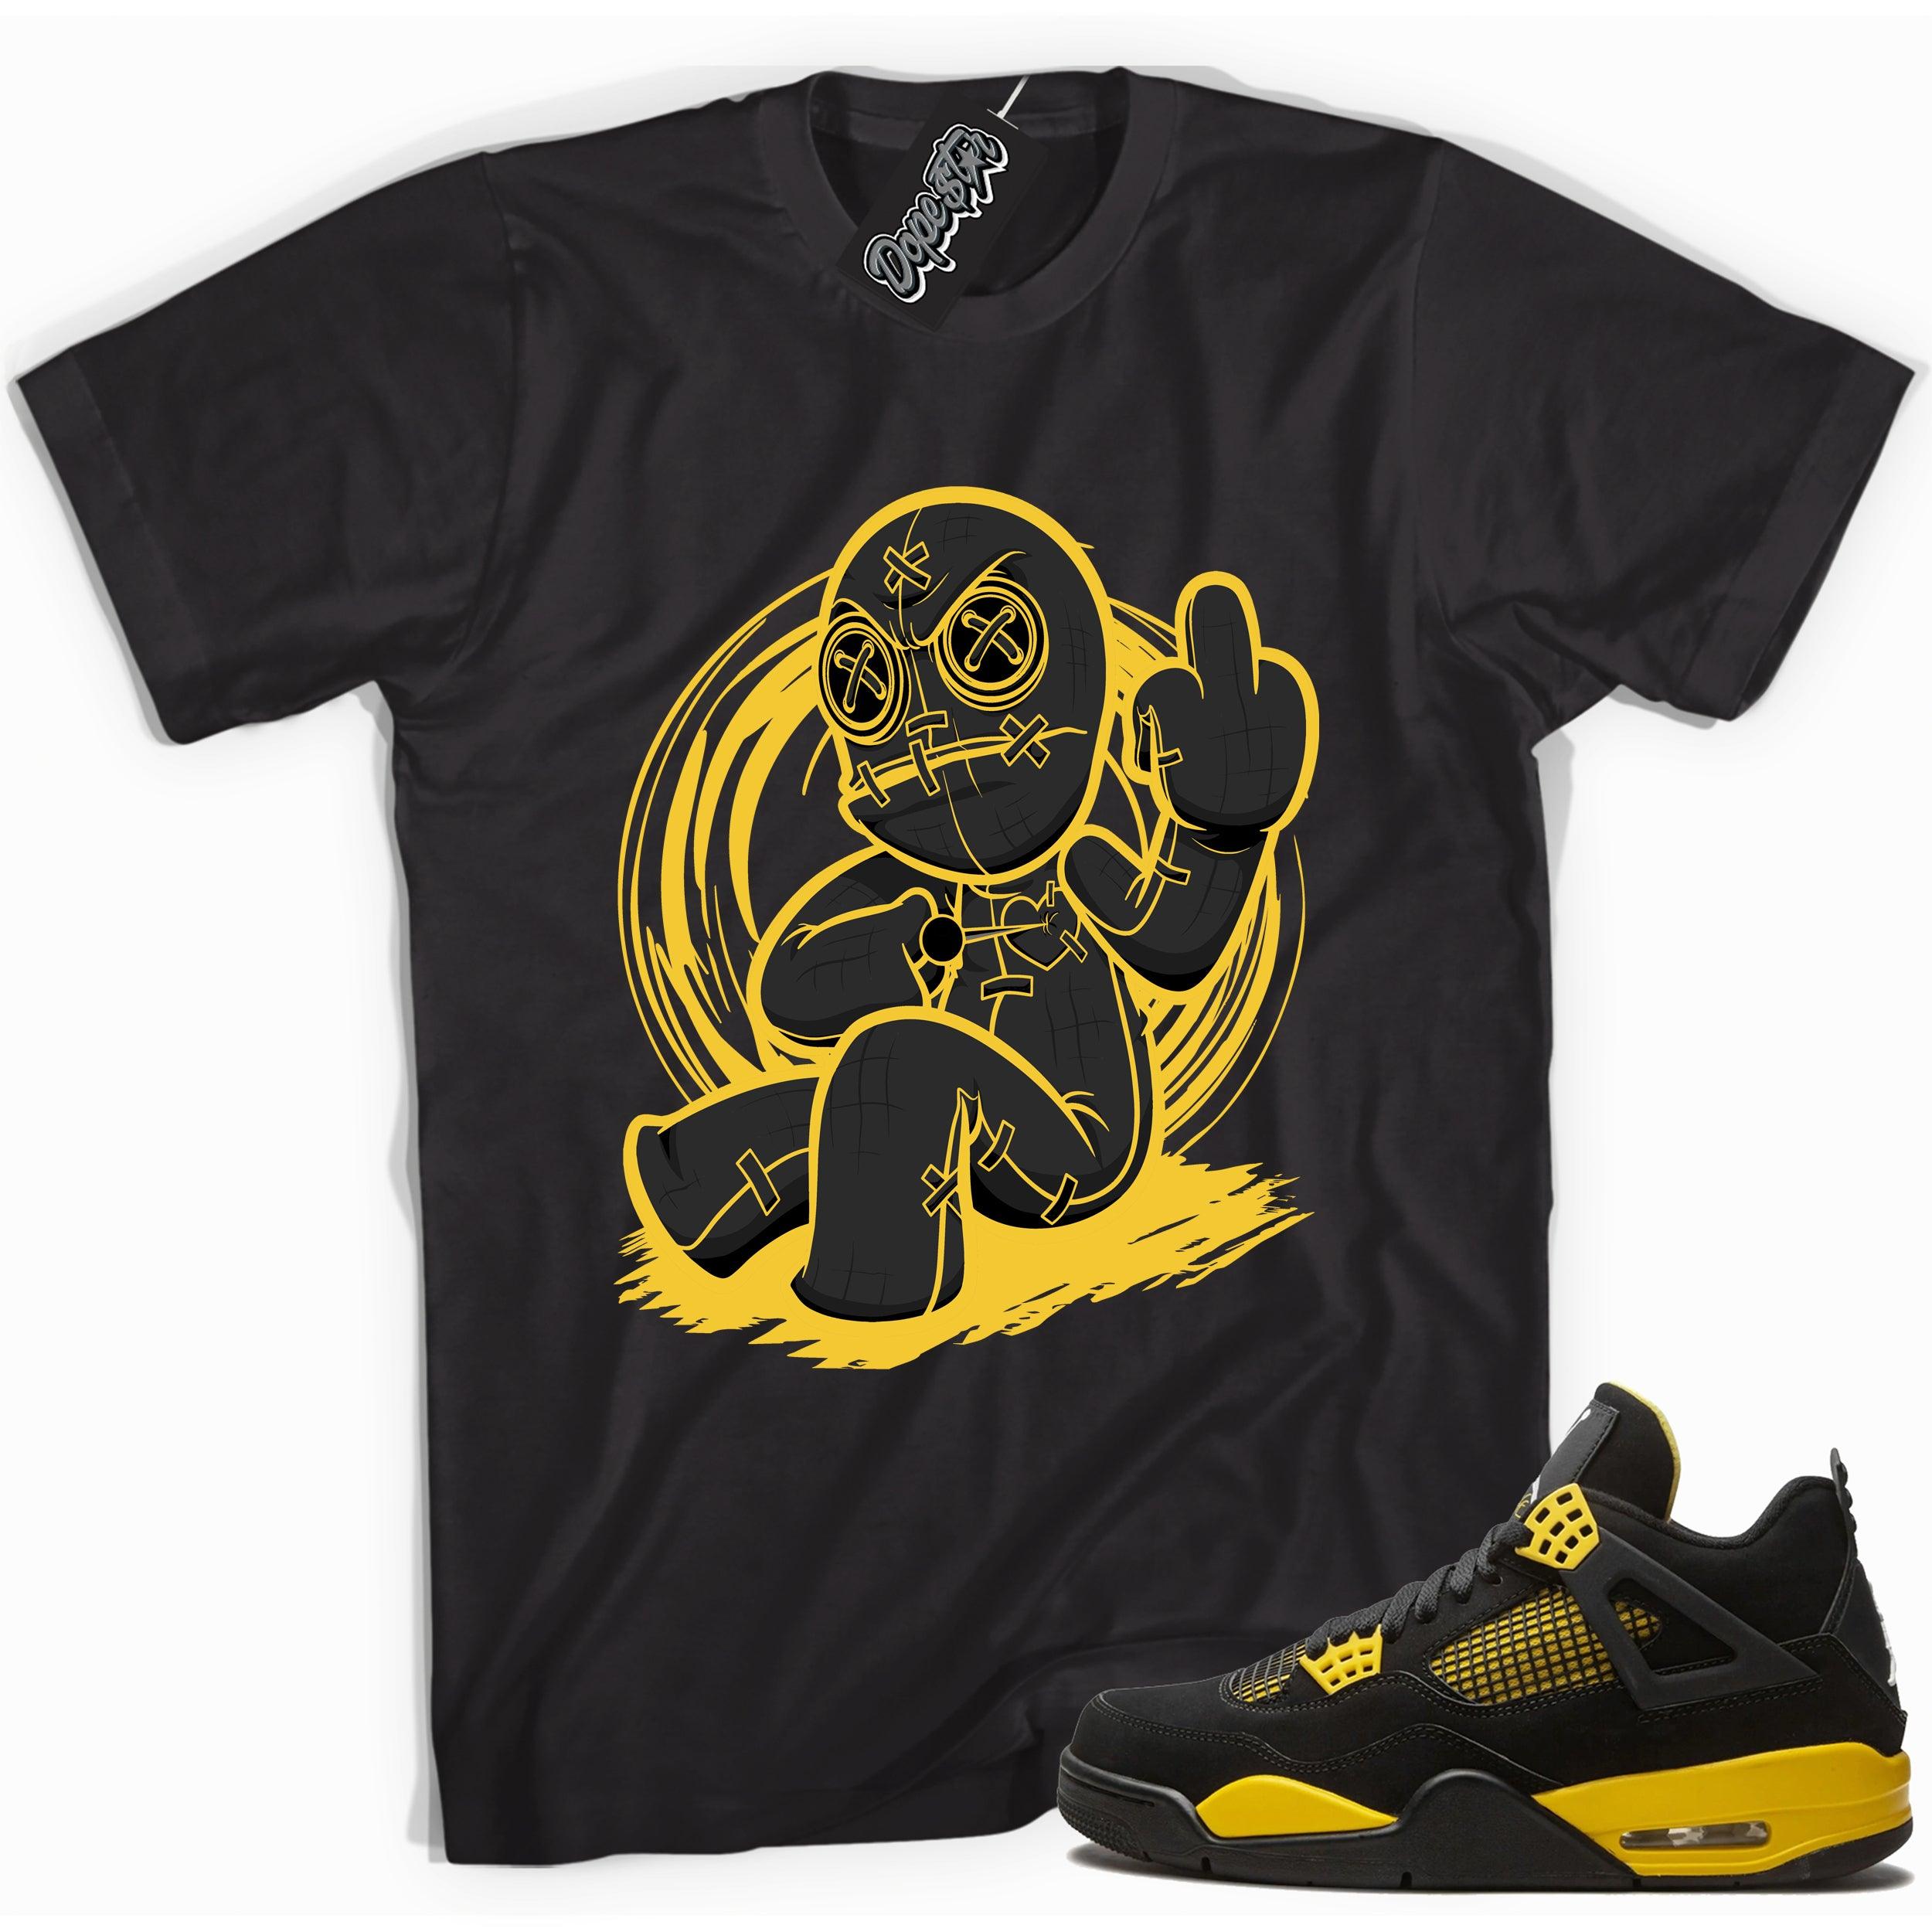 Cool black graphic tee with 'voodoo doll' print, that perfectly matches  Air Jordan 4 Thunder sneakers